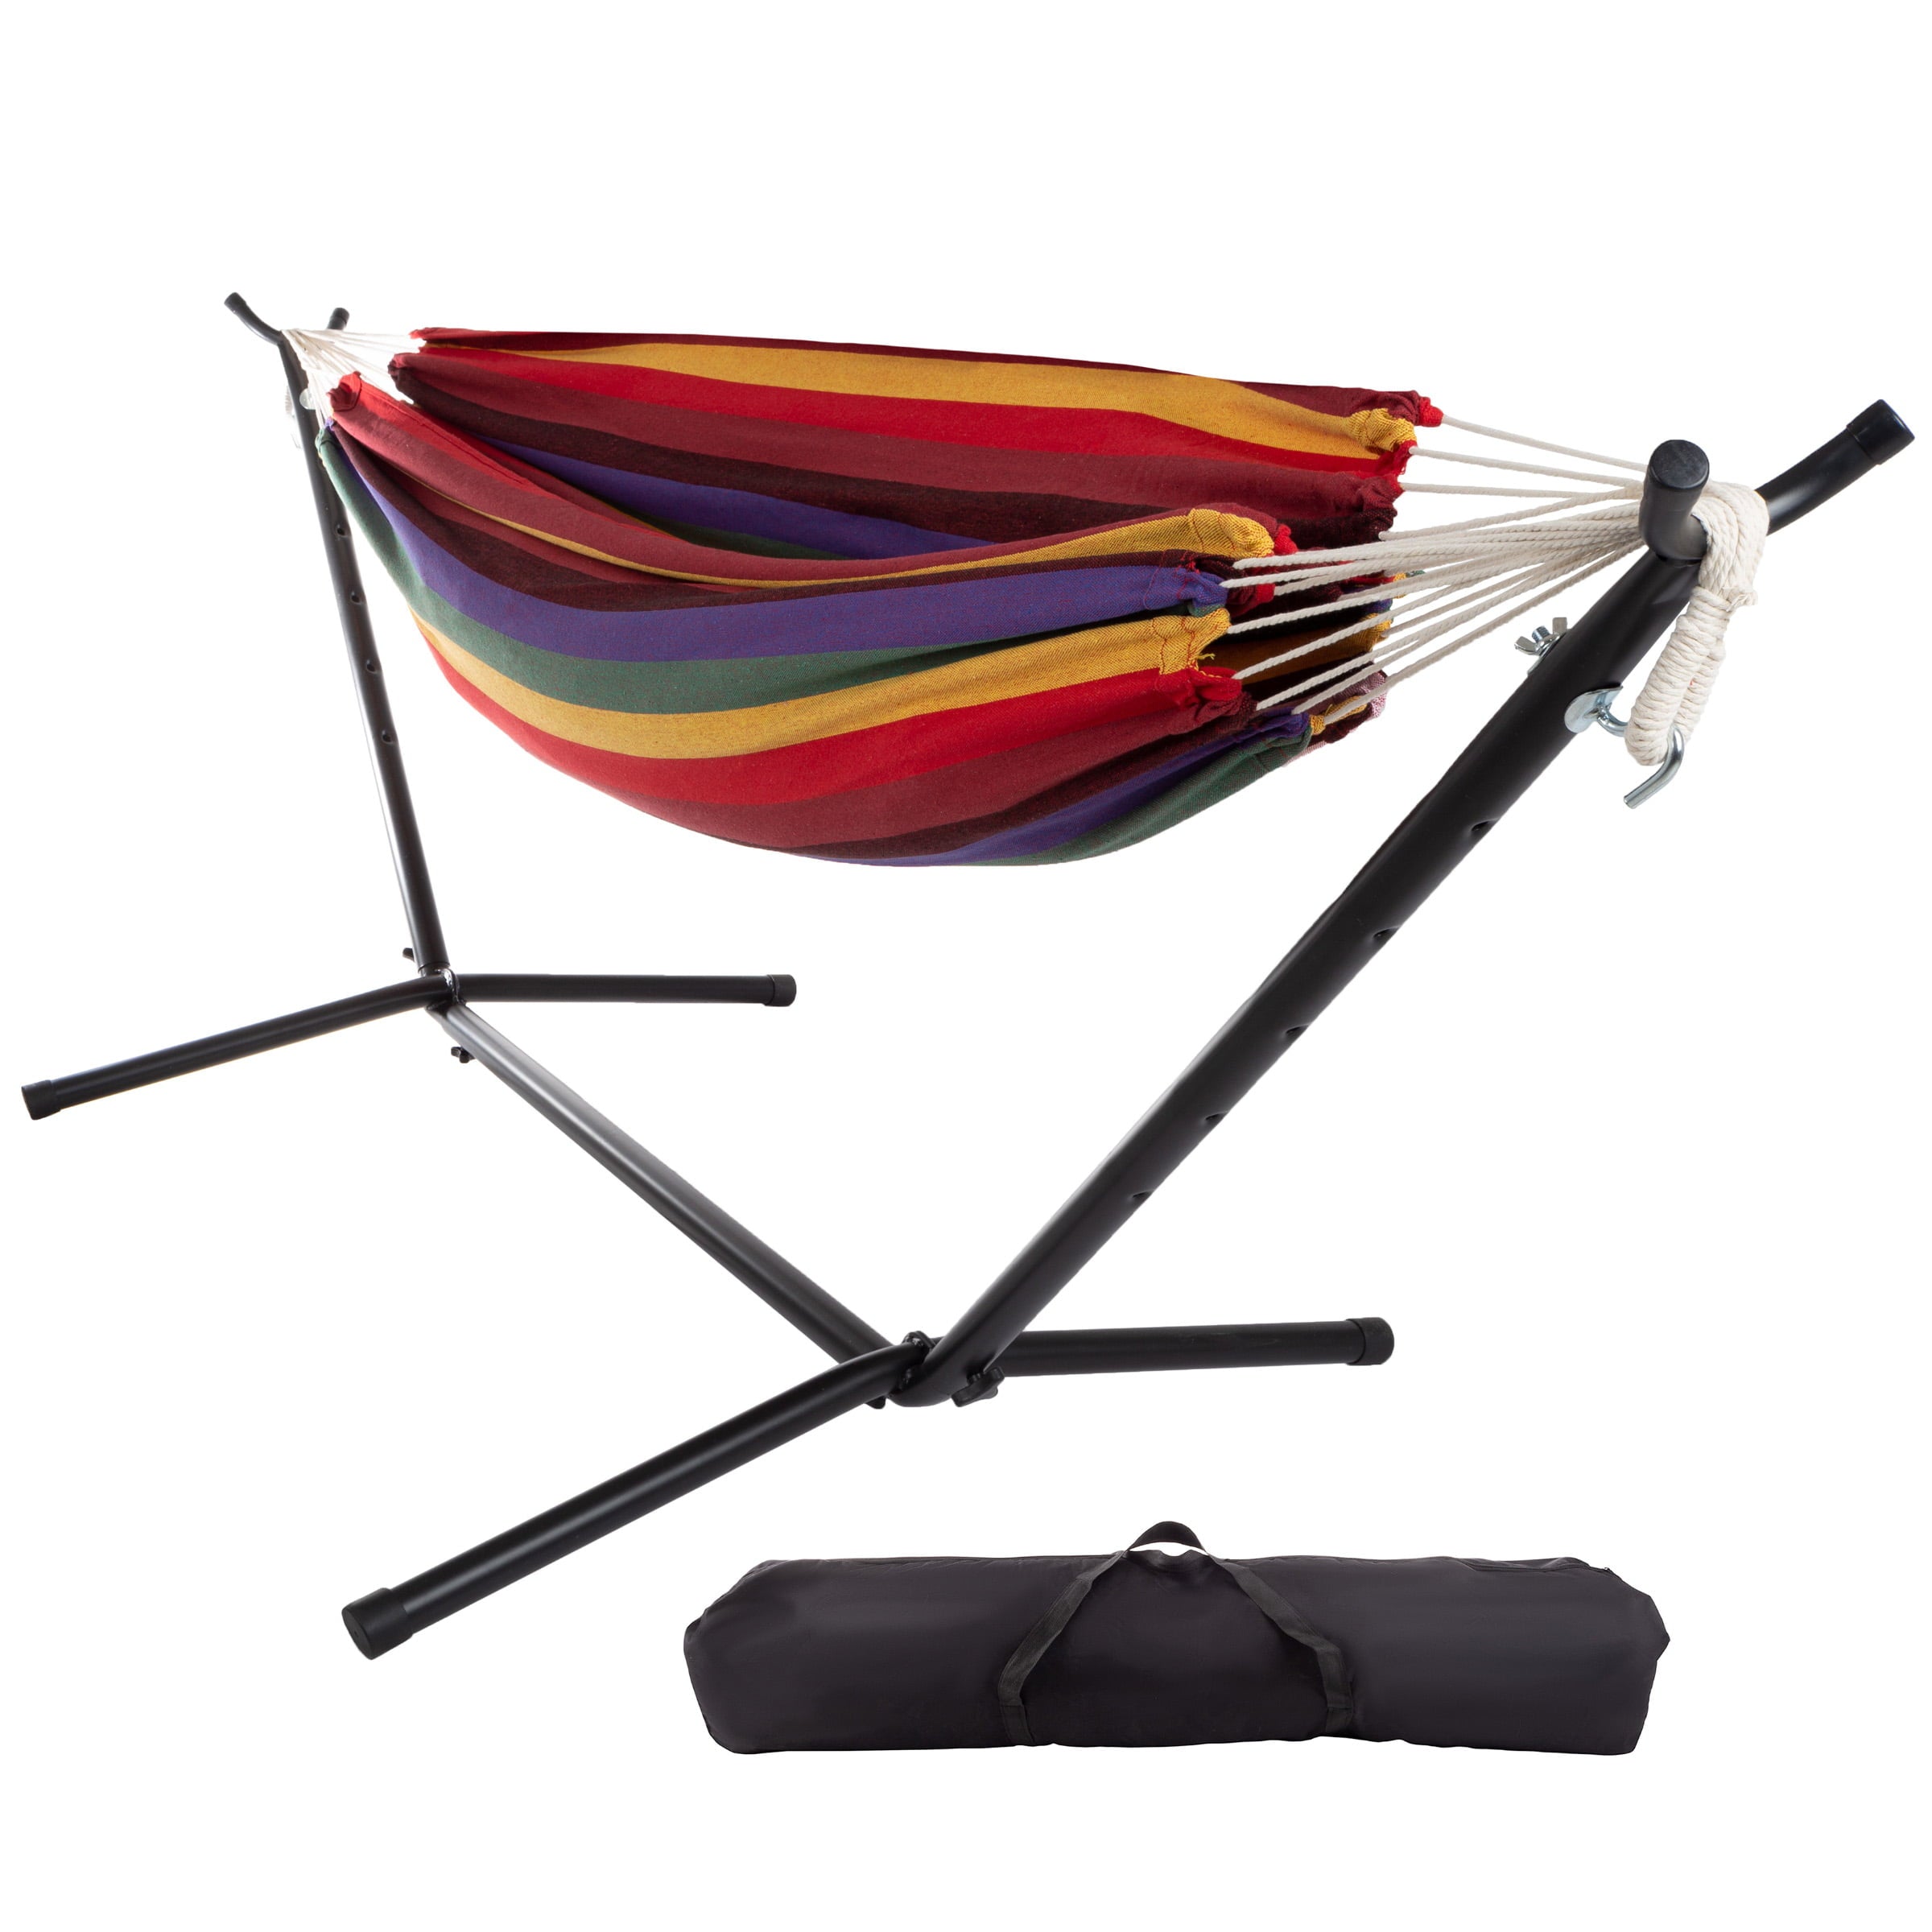 Pure Garden Brazilian Woven Cotton Double Hammock with Stand Included (Red/Purple/Yellow Stripes)